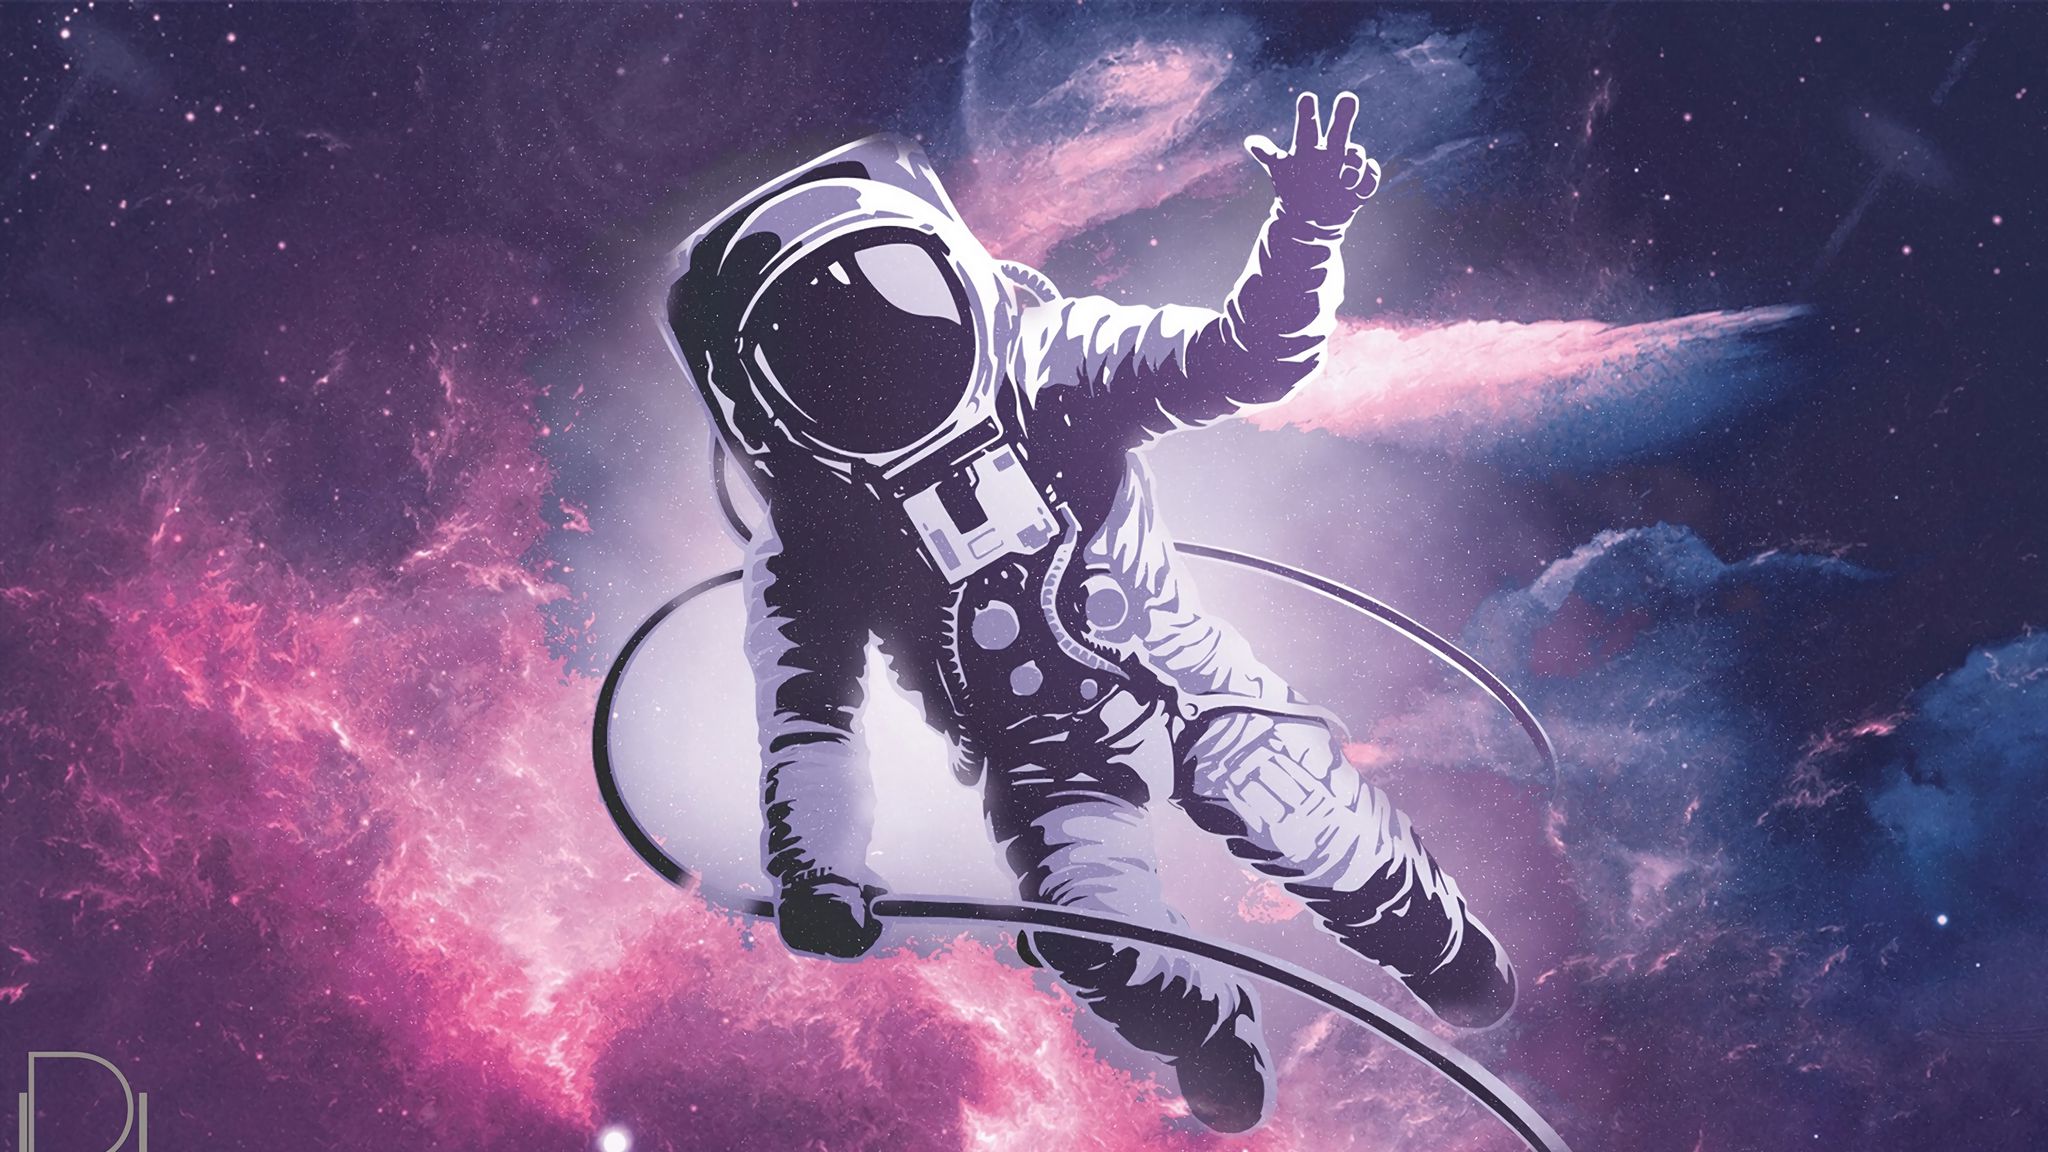 Download wallpaper 2048x1152 astronaut, spacesuit, space, art ultrawide monitor HD background